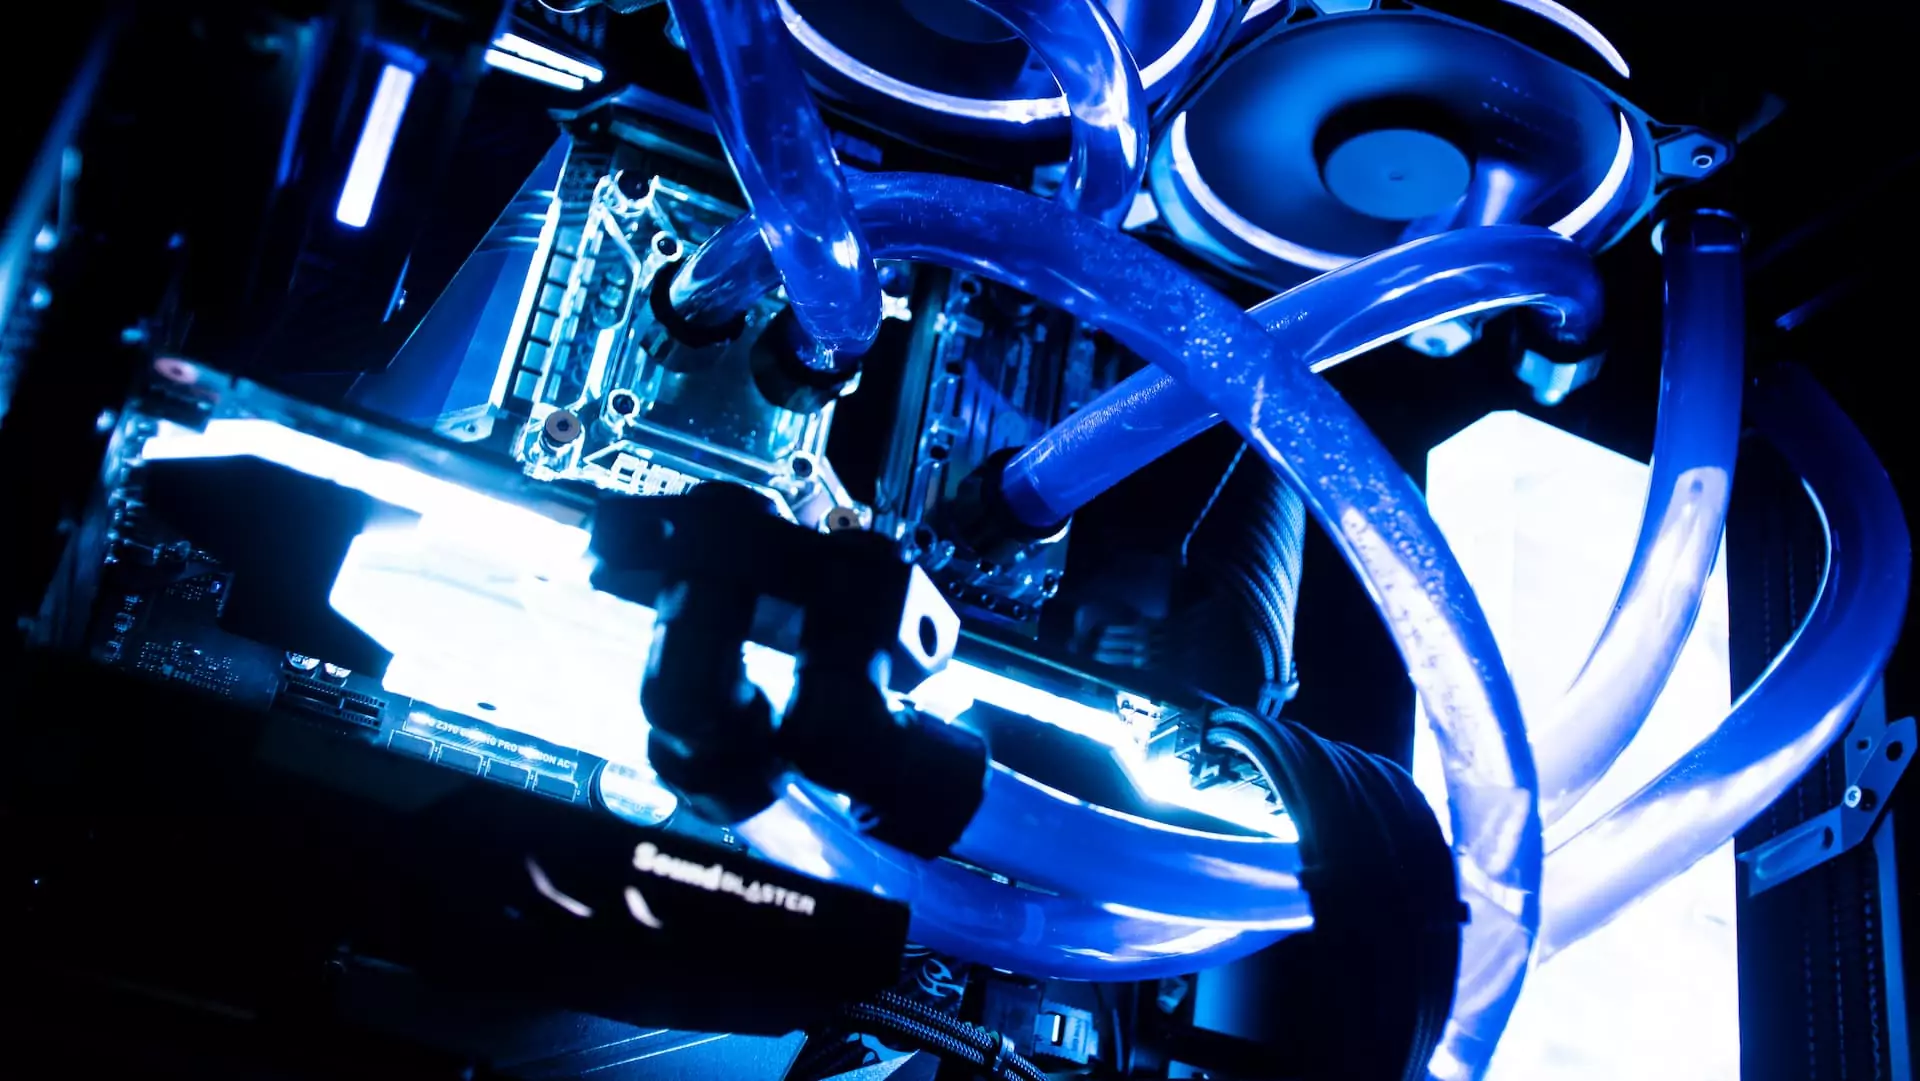 Multiple cores or multiple threads? We explain what you need to known when buying a CPU.